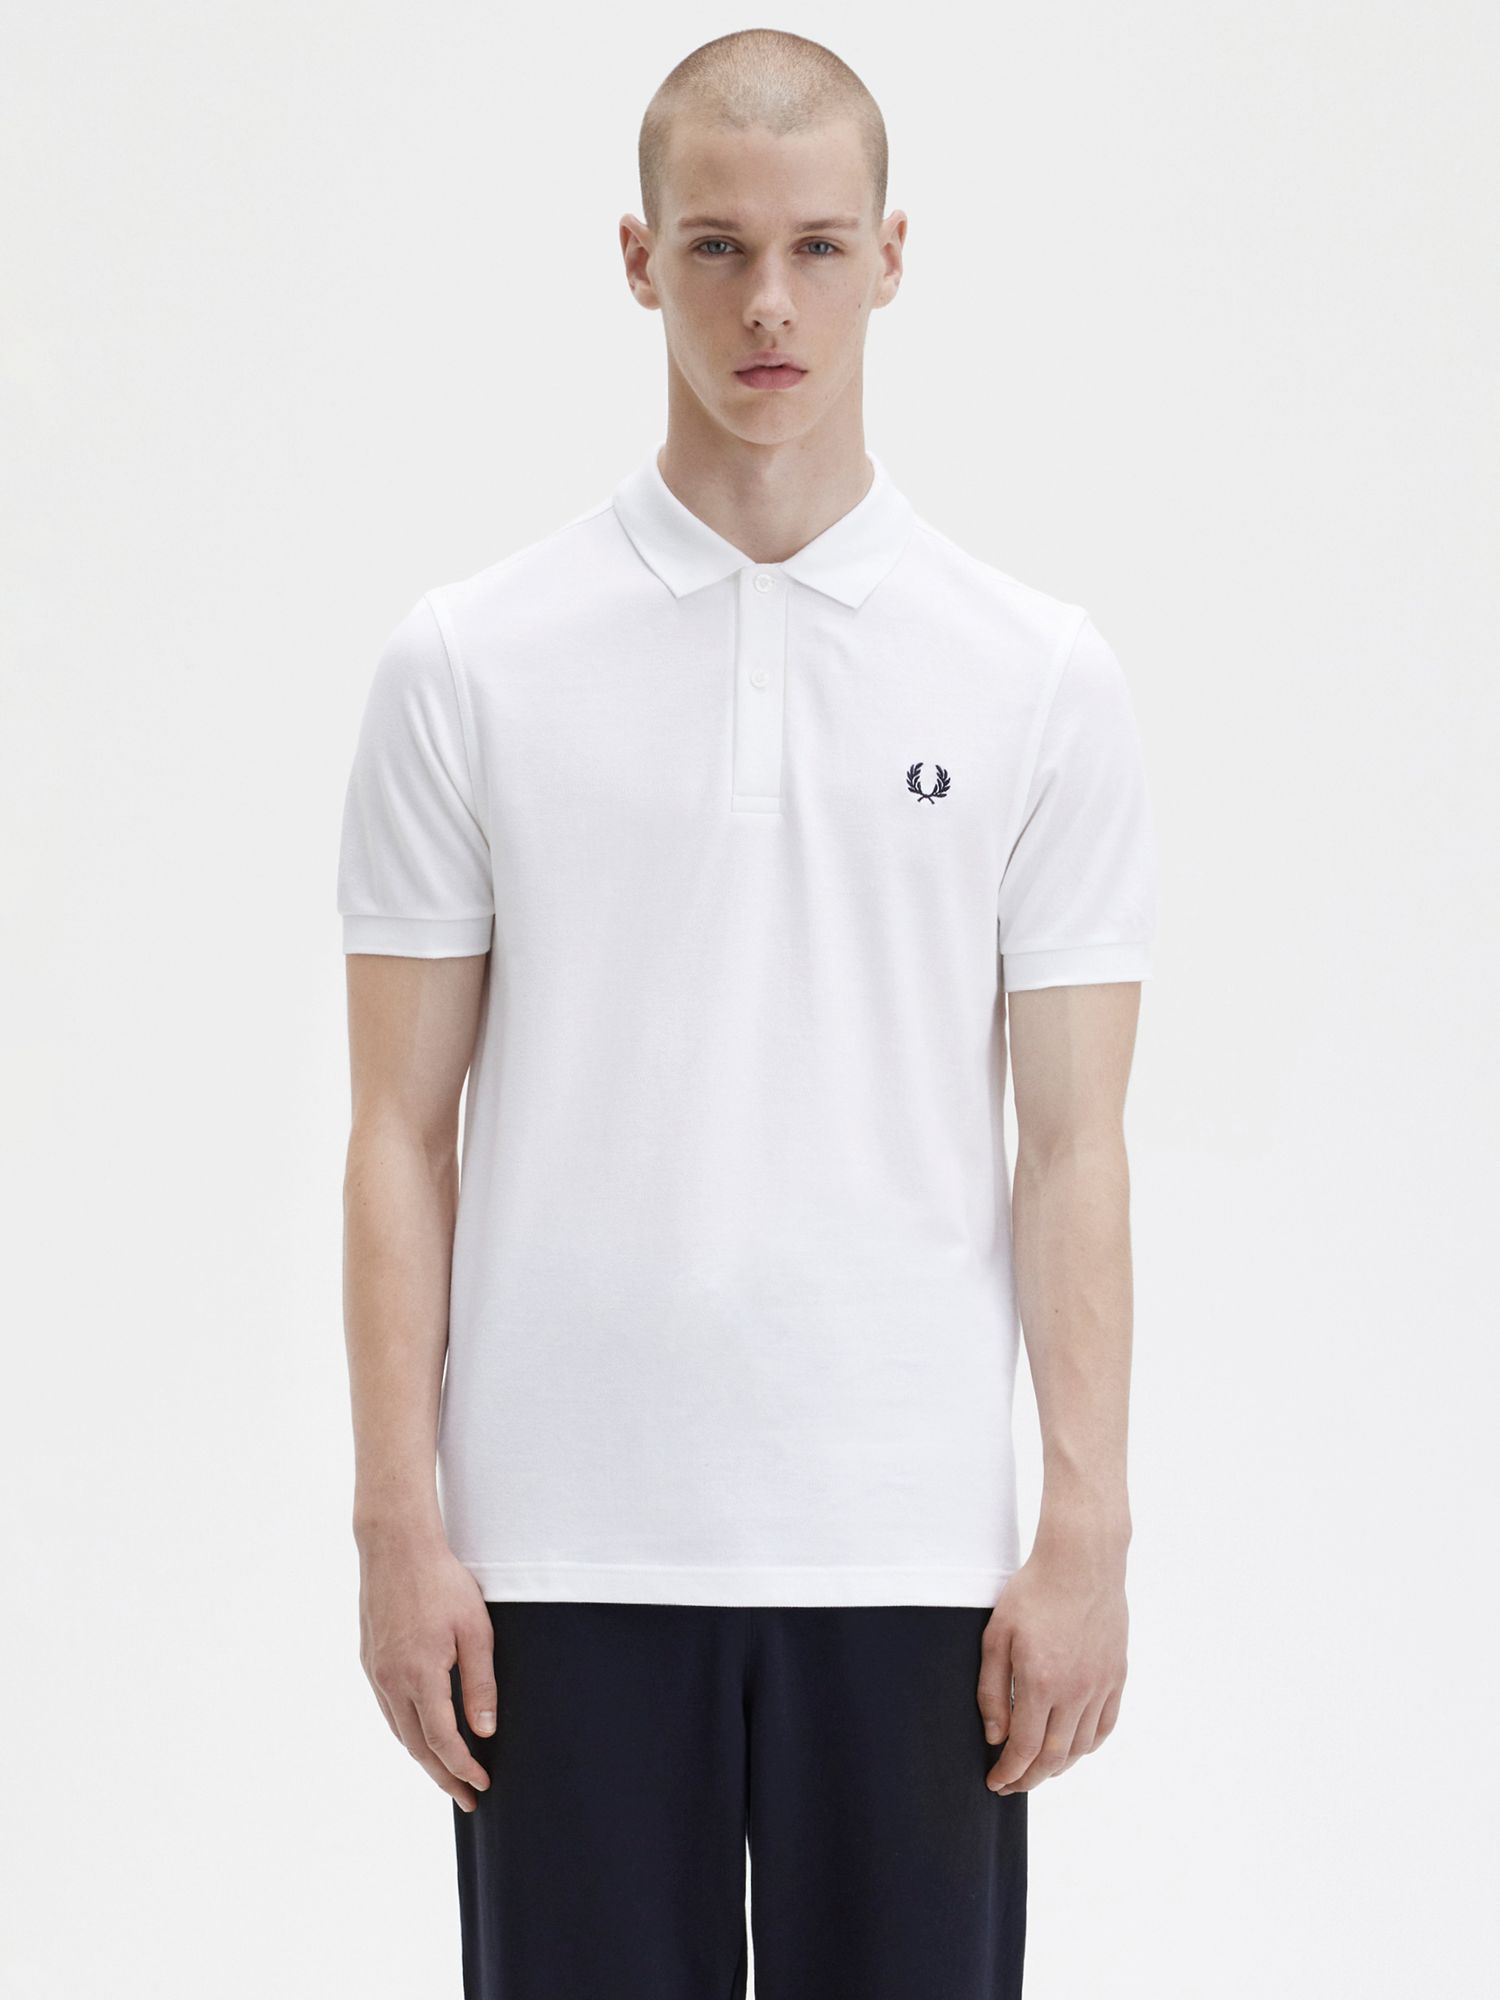 Fred Perry Plain Regular Fit Polo Shirt, White at John Lewis & Partners